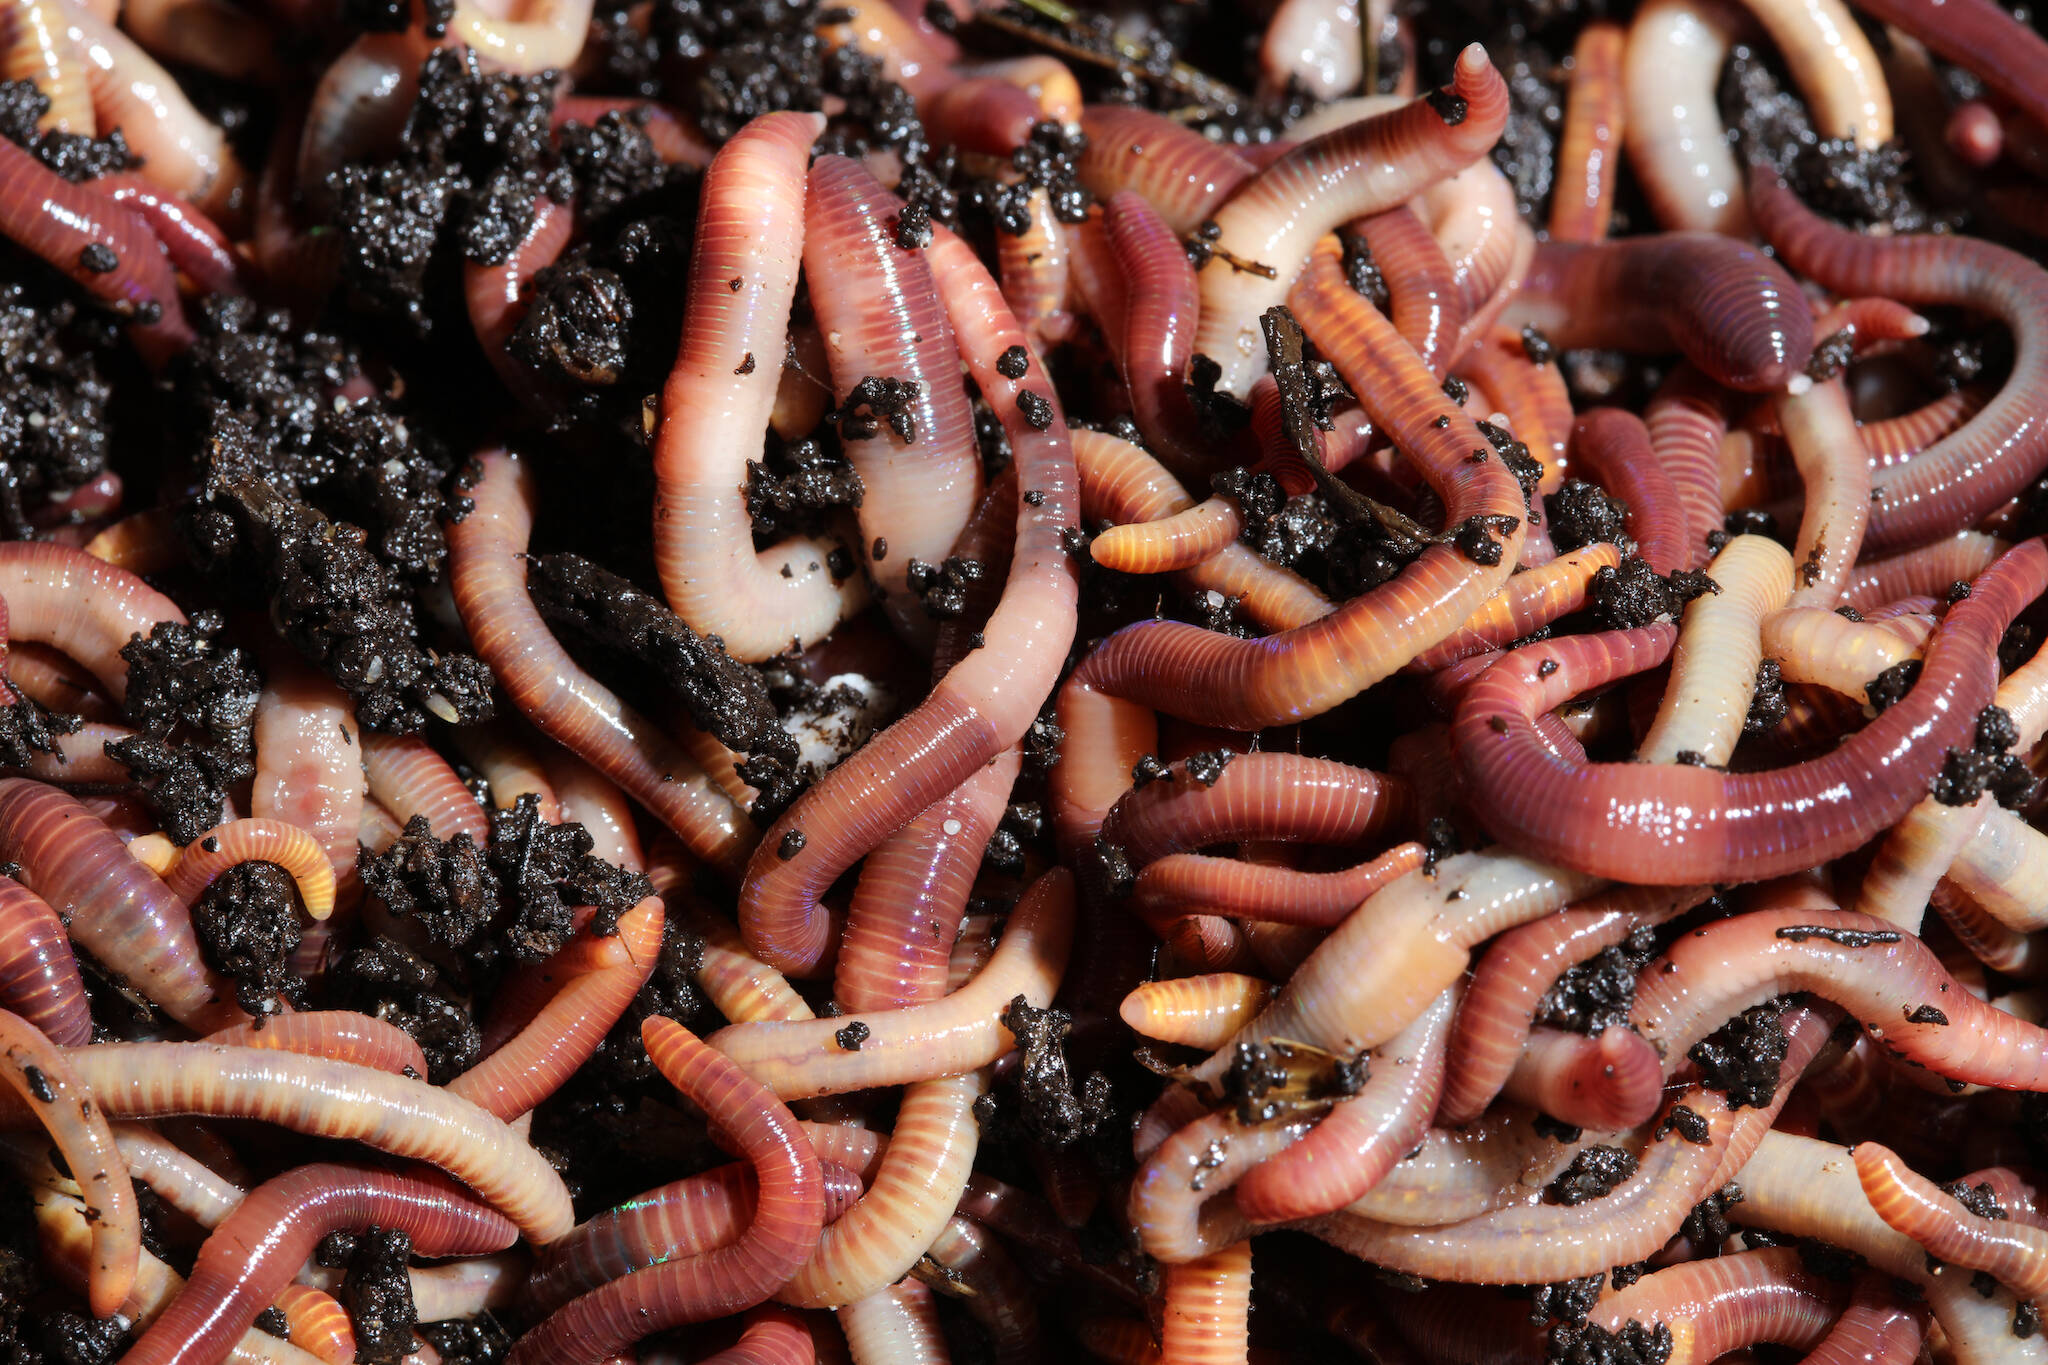 https://media.blogto.com/articles/20240212-earthworms-canada.jpg?w=2048&cmd=resize_then_crop&height=1365&quality=70